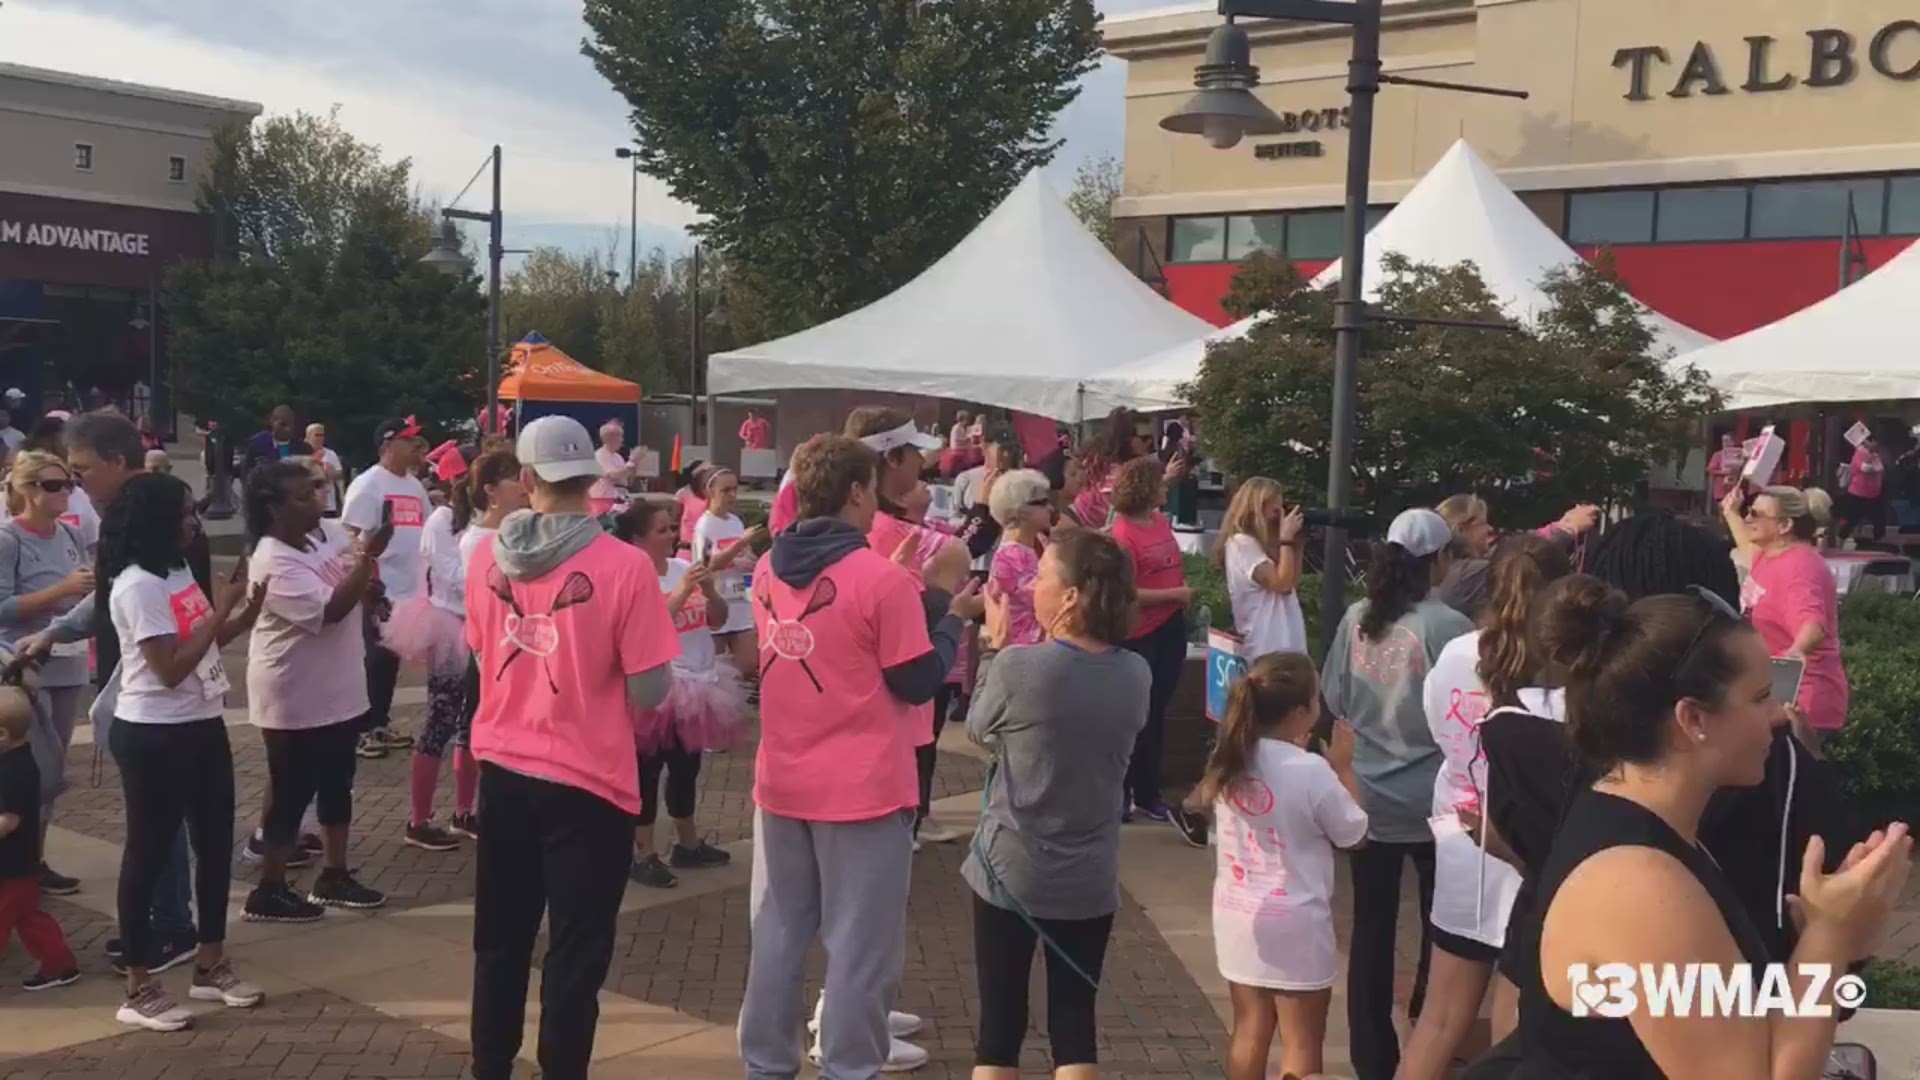 Survivor Ceremony at United in Pink 5K at Shoppes at River Crossing. Breast cancer survivors honored by United in Pink organization. They provide support for breast cancer patients and their families.